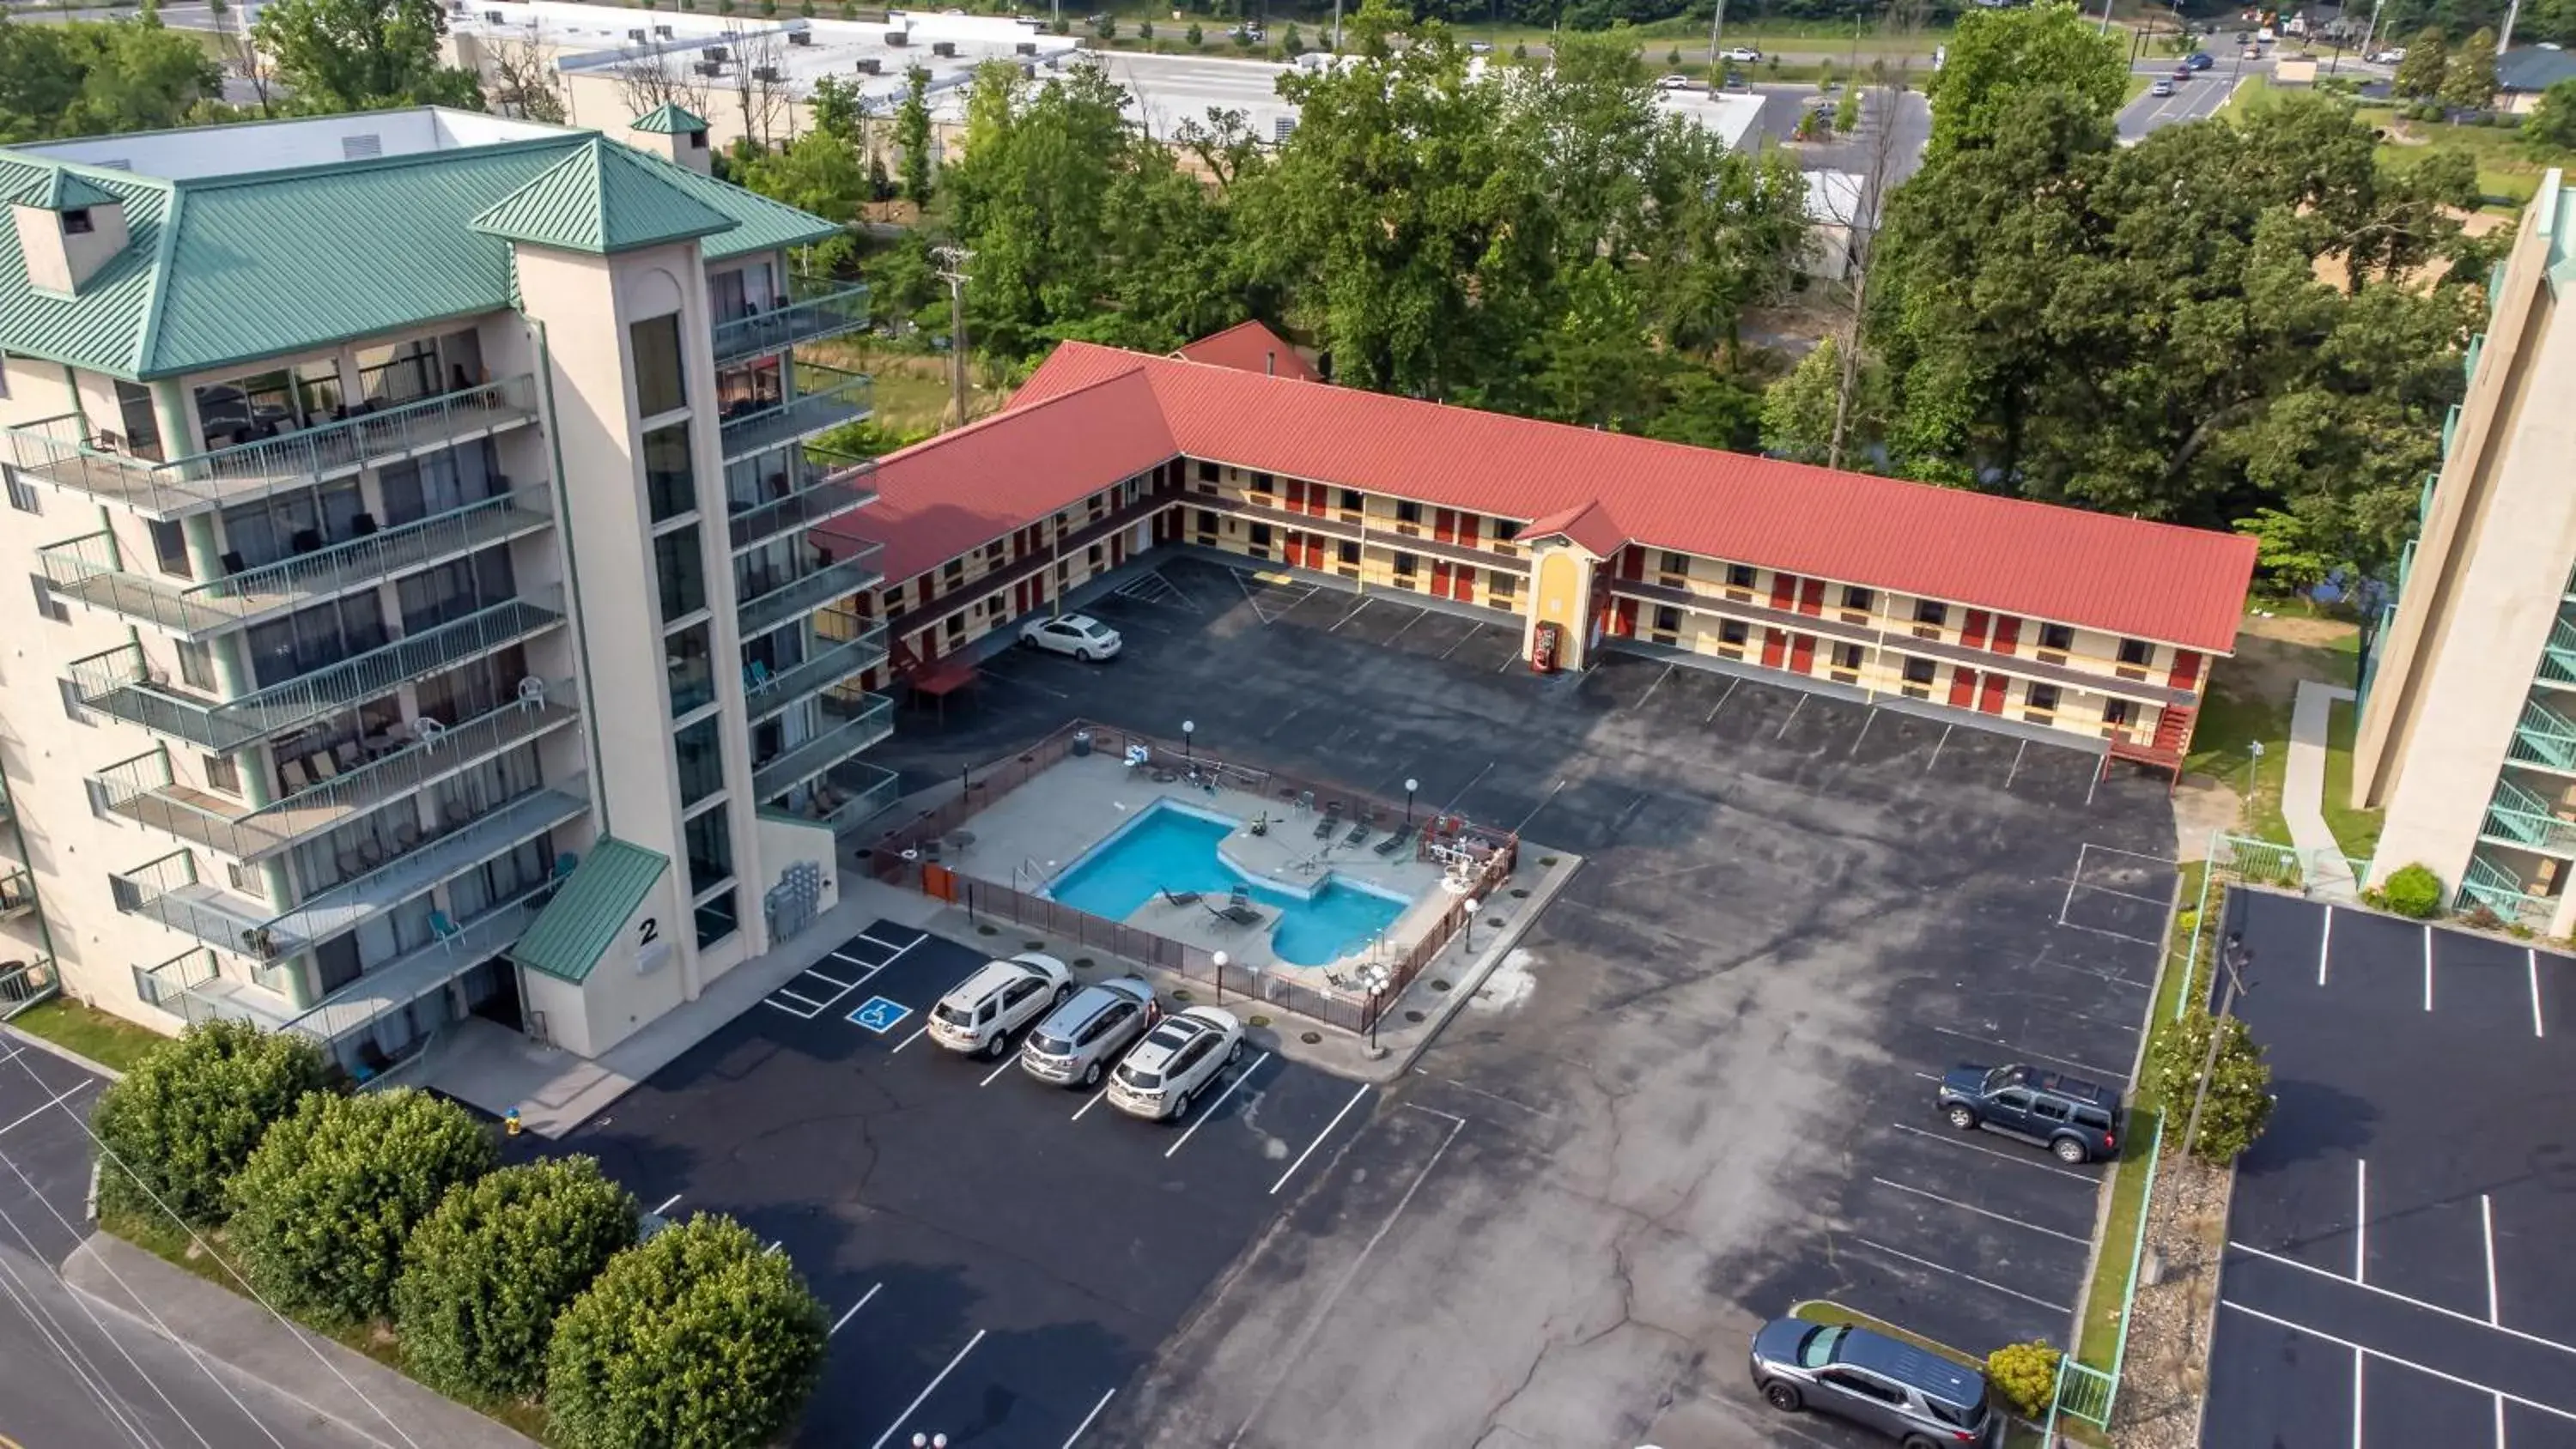 Property building, Bird's-eye View in River Place Inn